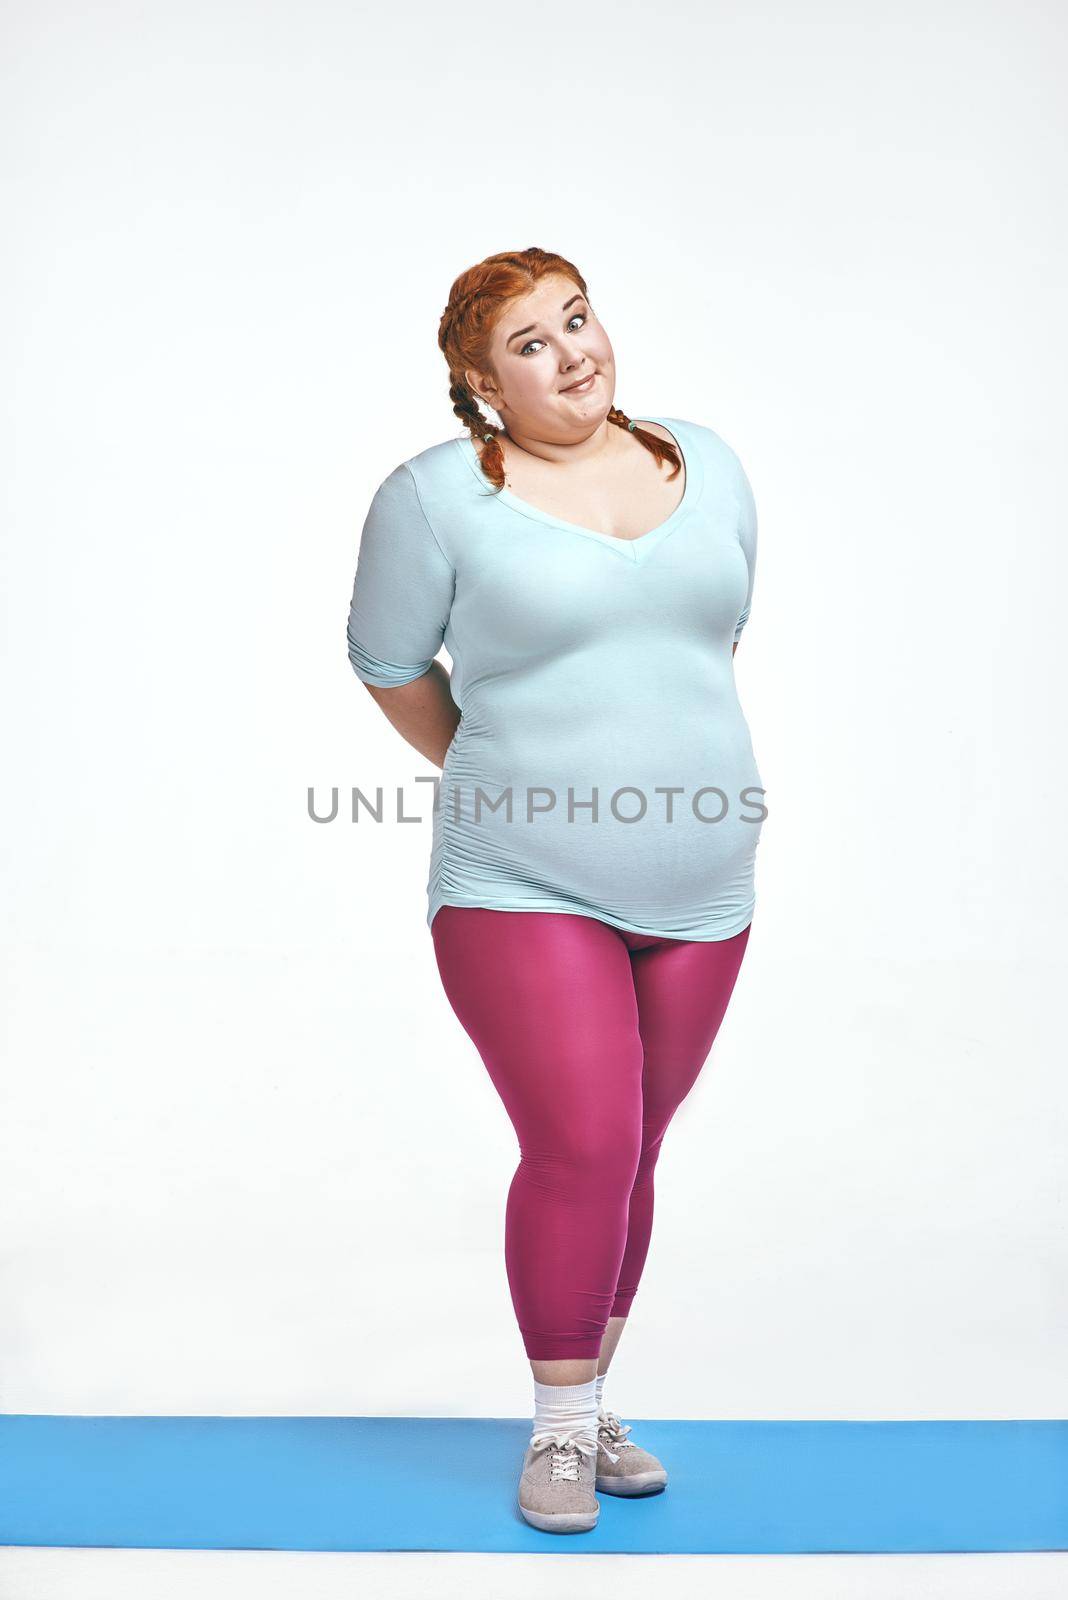 Funny, amusing, red haired, chubby woman is shy by friendsstock